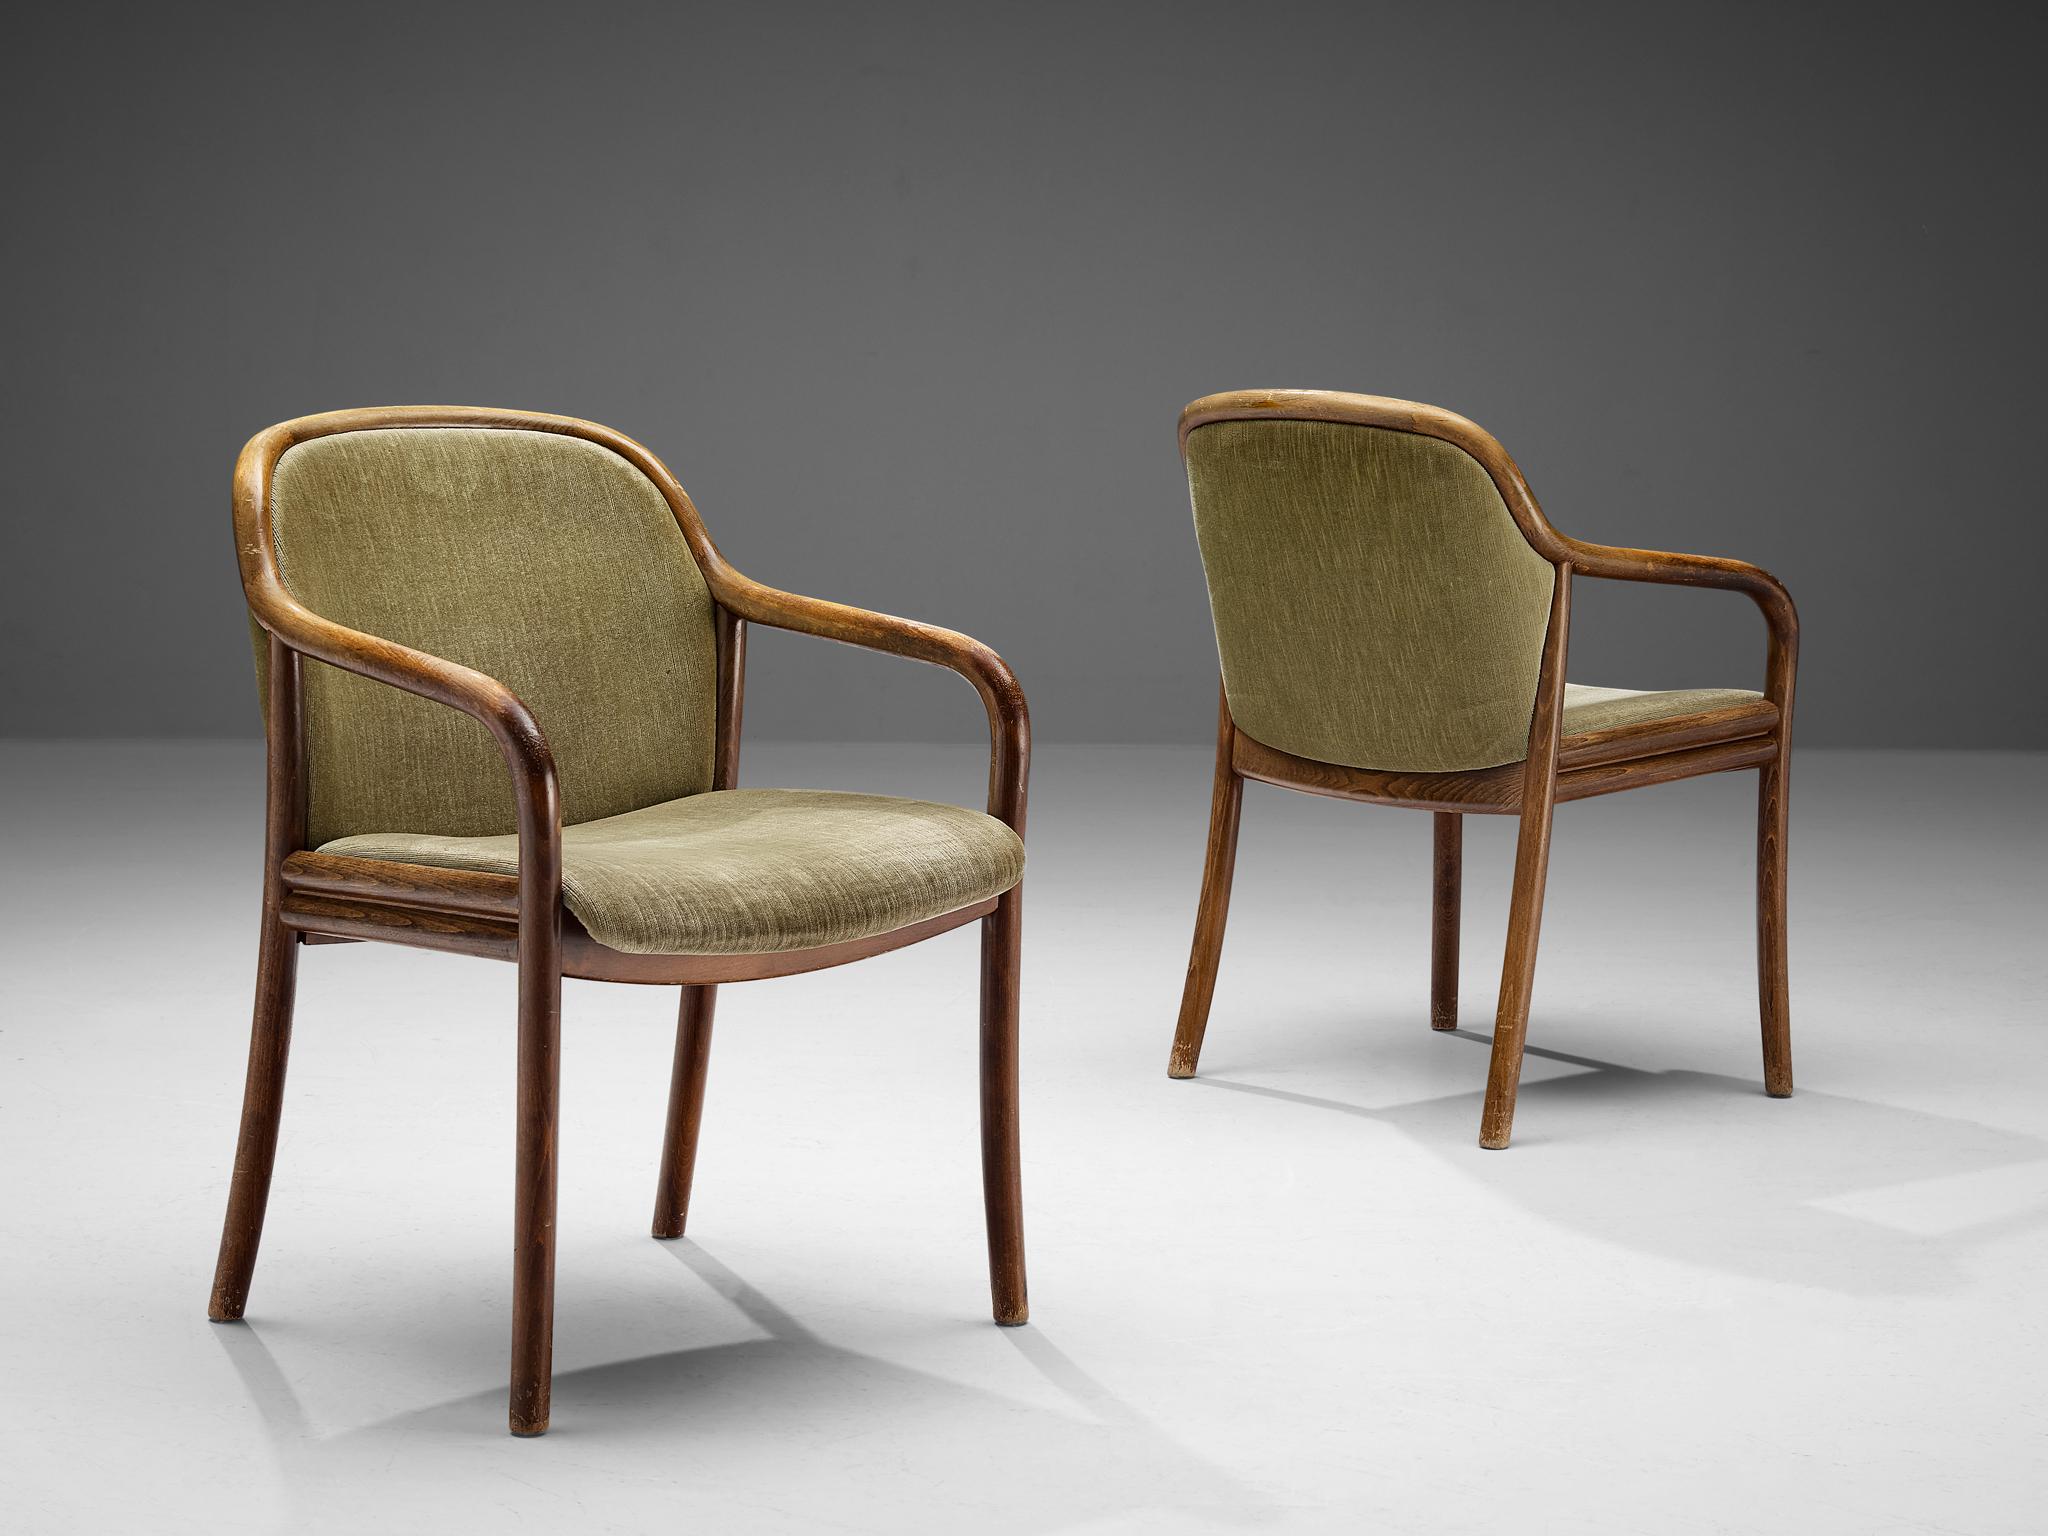 Ton, armchairs, stained beech and leatherette, Czech Republic, 1960s.

These elegant armchairs, manufactured by Ton, feature a wonderful bentwood frame. Simplistic design and a more modest model of Ton and Thonet. The seat and backrest are